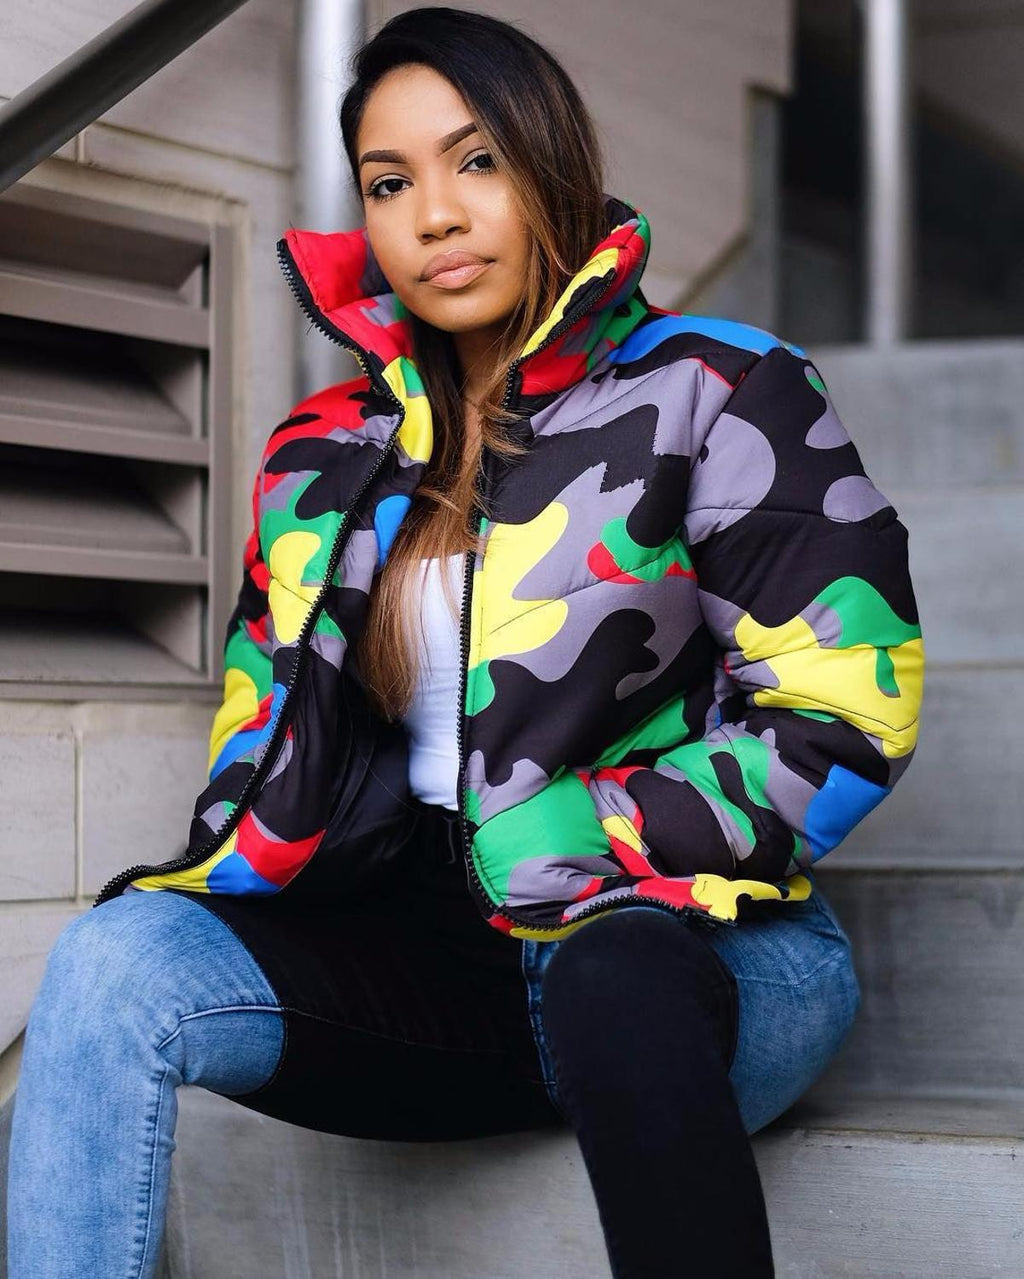 Women's Winter Thick Warm Short Parka Coat - Multi Colored Camouflage Jacket